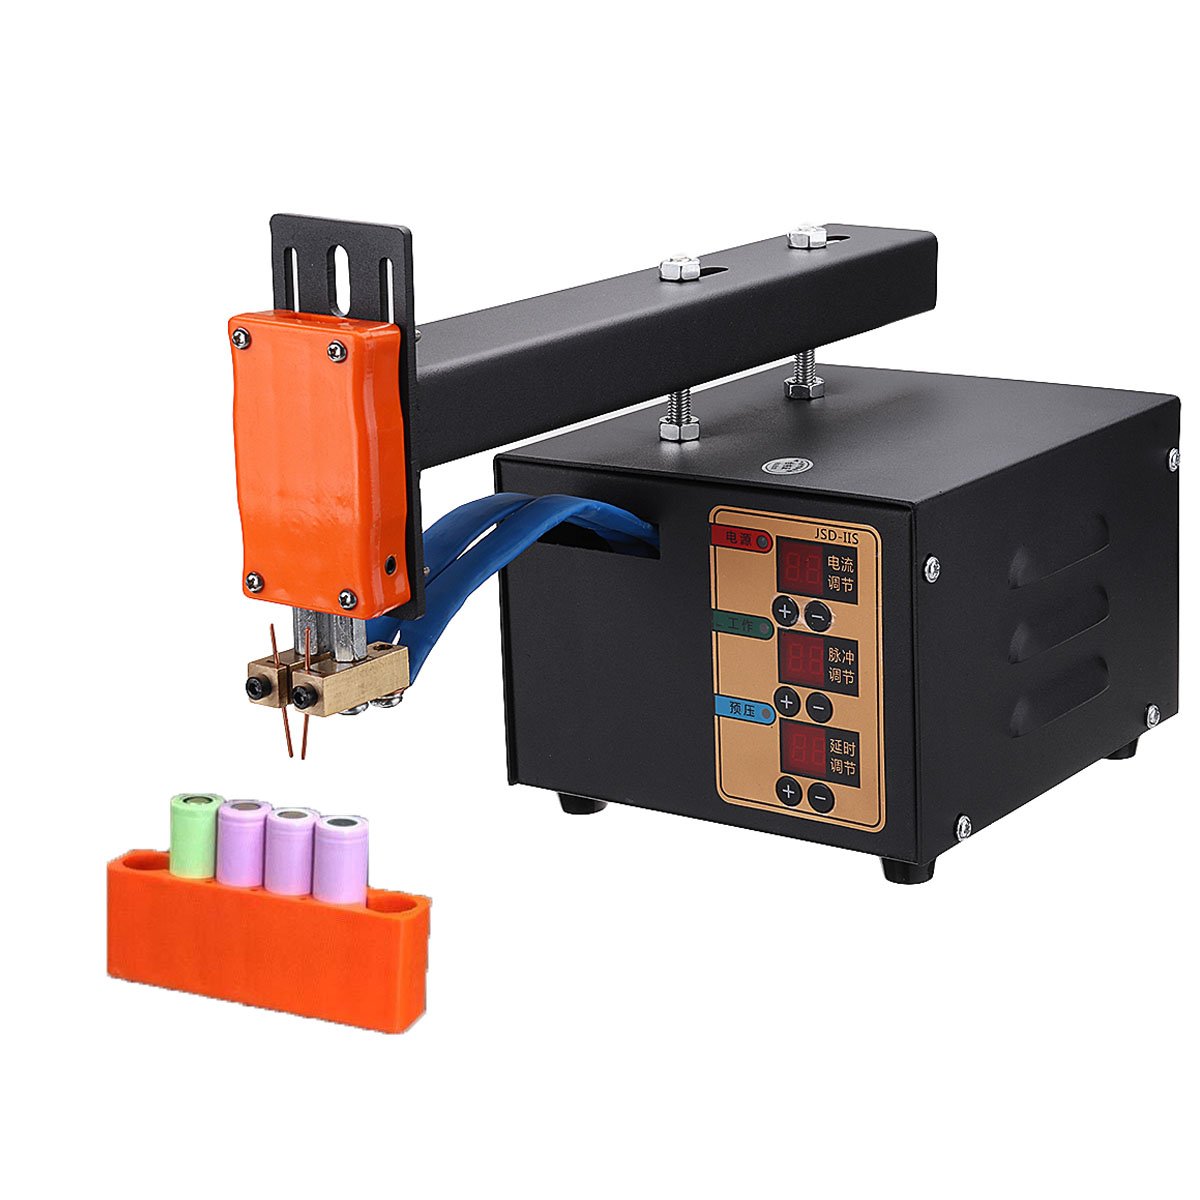 220V 3KW Battery Spot Welding Machine Extended Arm Welding Machine with Pulse & Current Display 2